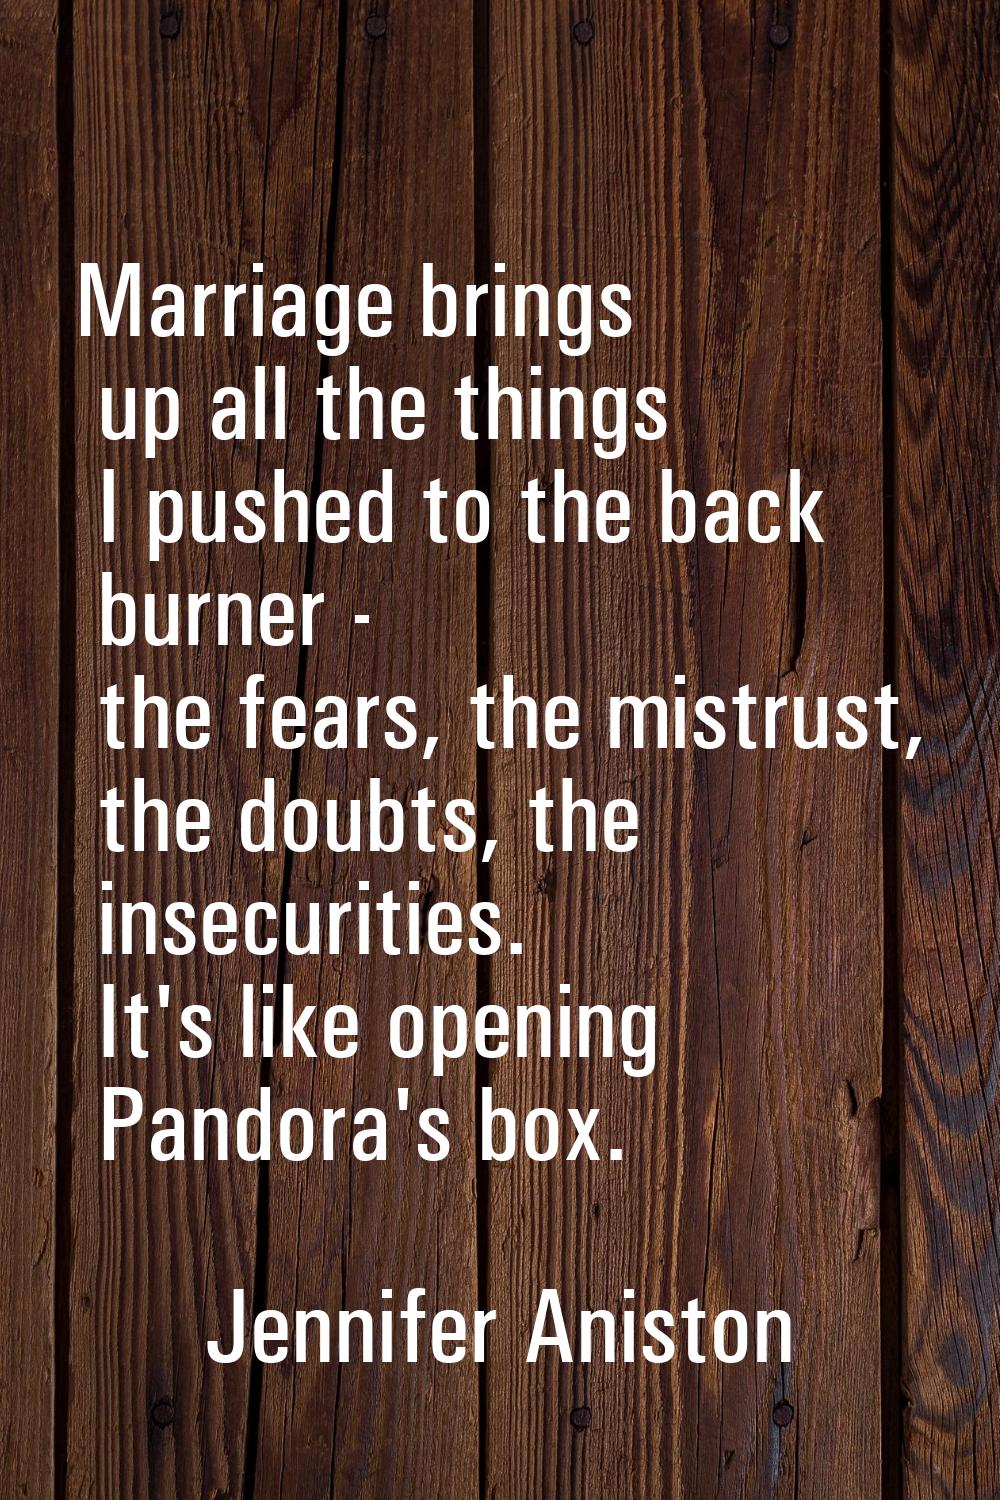 Marriage brings up all the things I pushed to the back burner - the fears, the mistrust, the doubts